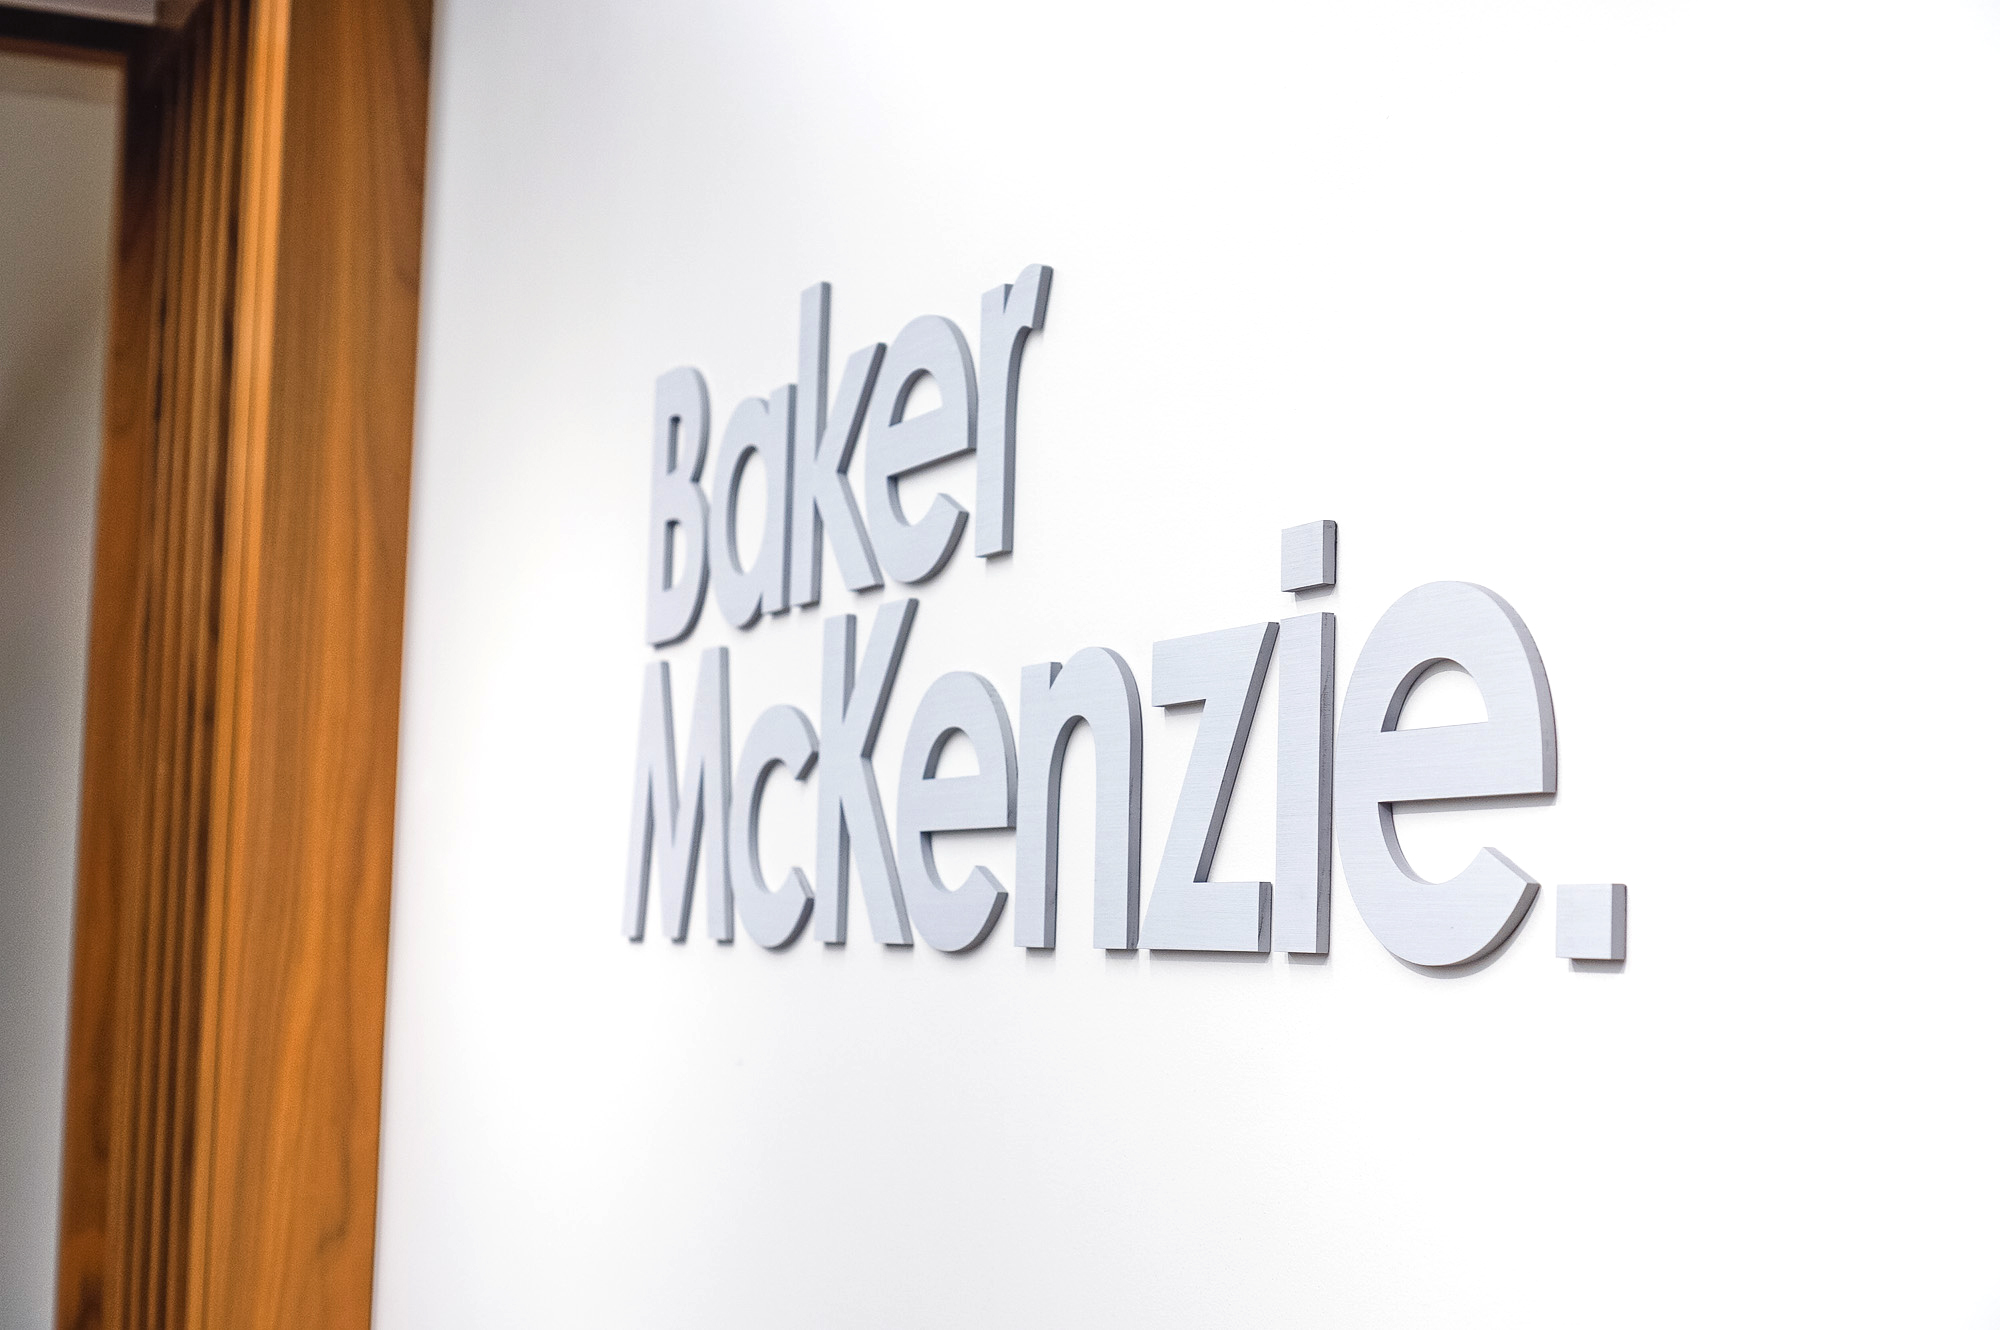 Brushed metal lobby sign on white wall at the office of Baker McKenzie, a multinational law firm.